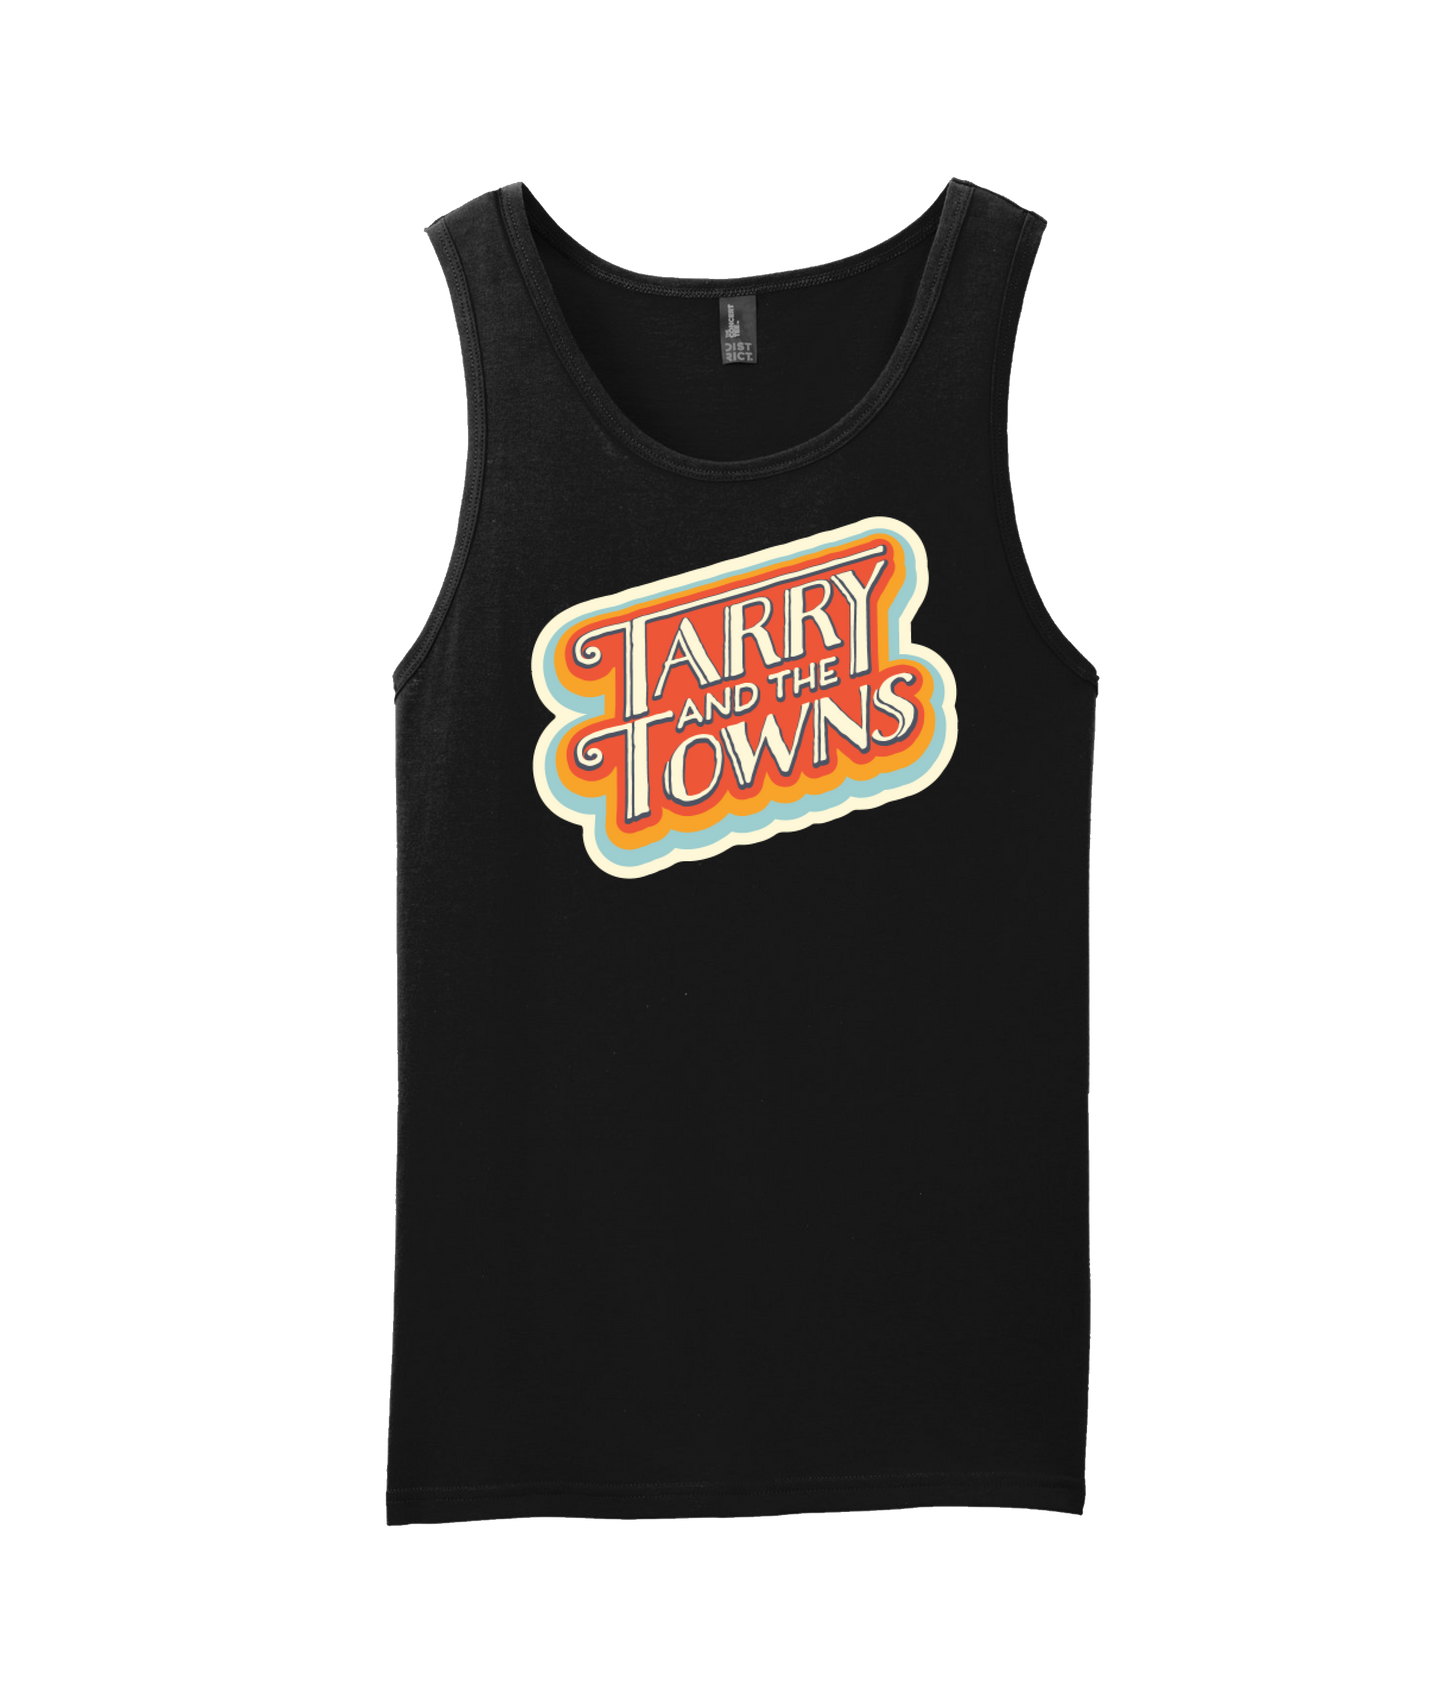 Tarry and the Towns - Vintage - Black Tank Top